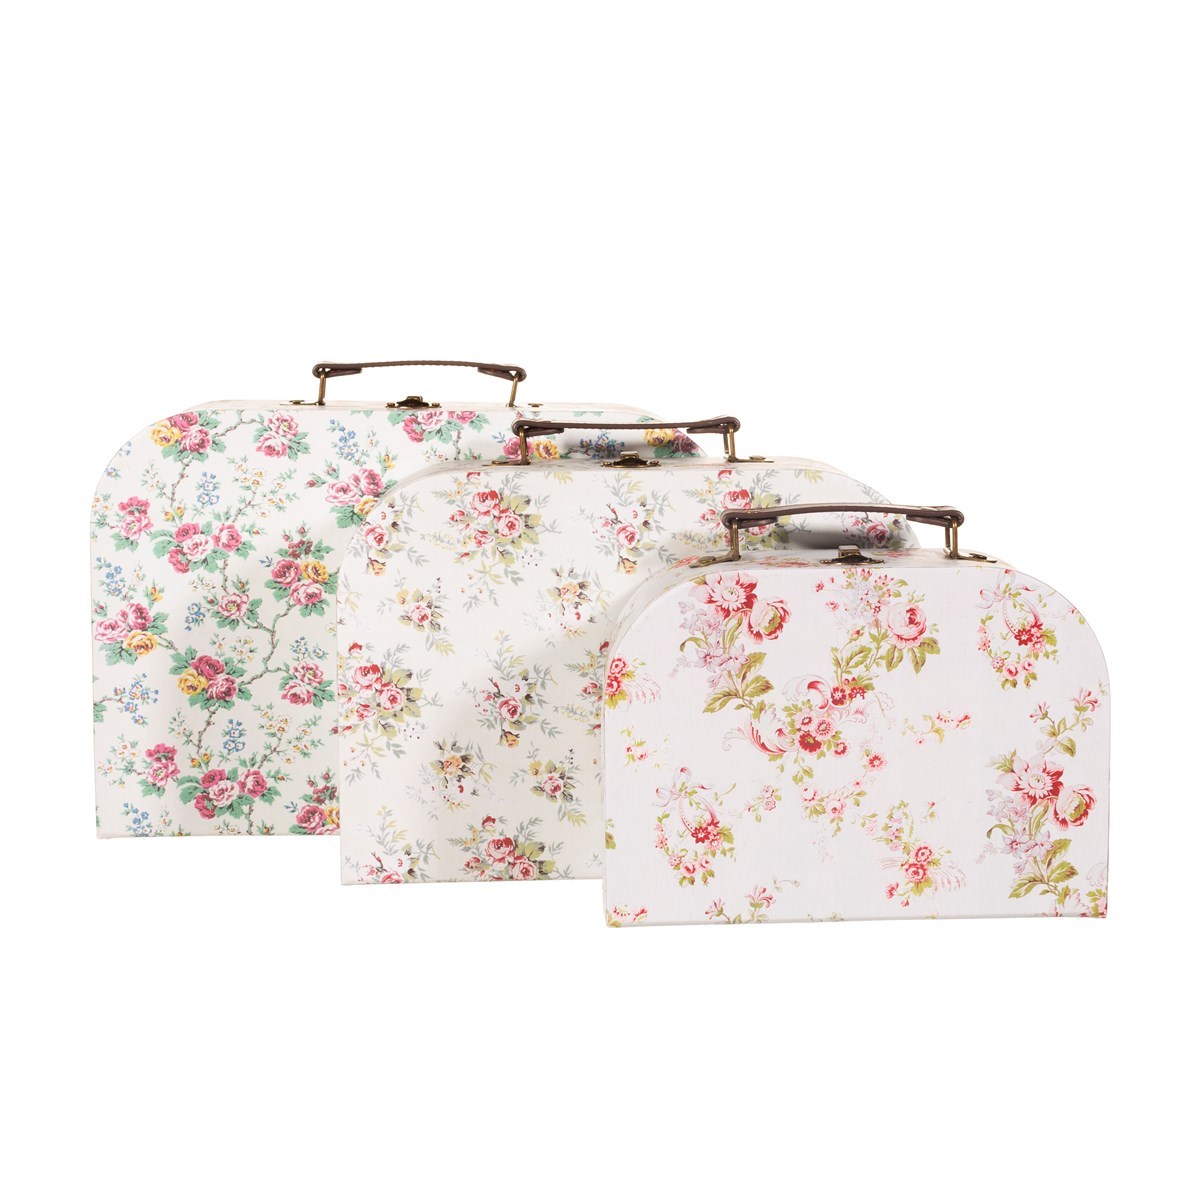  Sass and Belle SET OF 3 VINTAGE MAP SUITCASES : Home & Kitchen